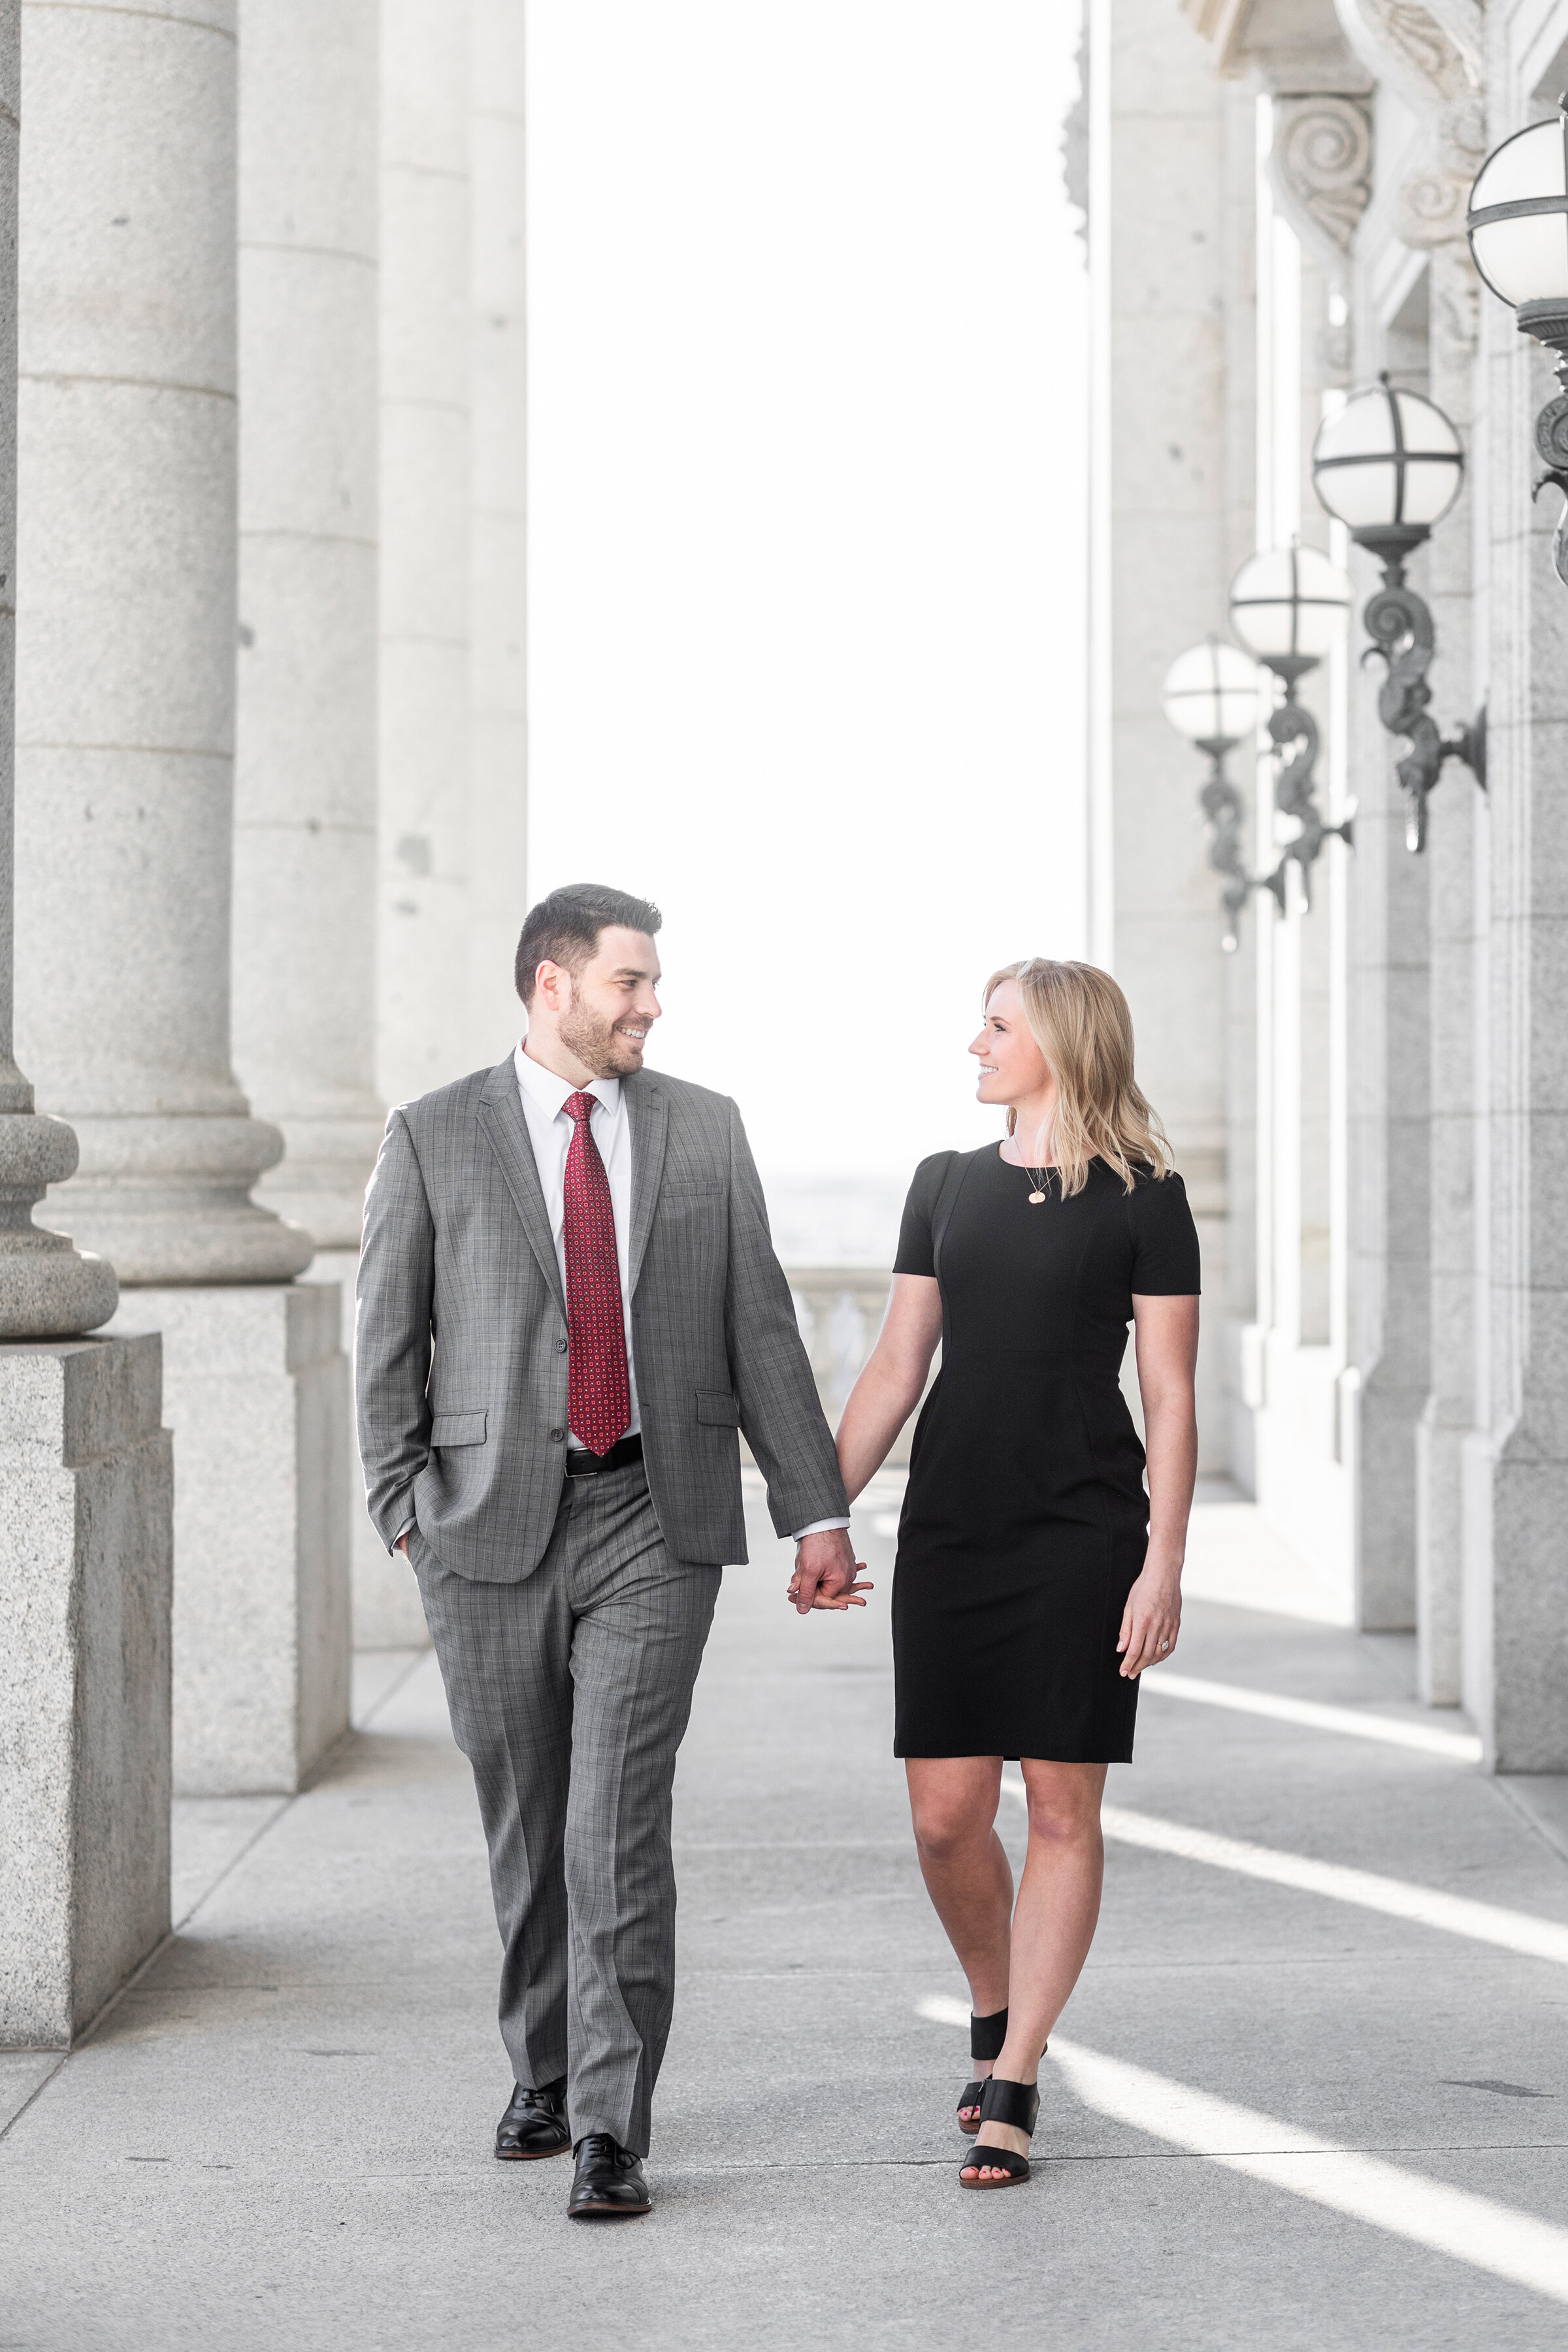  10 Locations in Northern Utah for Engagement Shoots. Northern Utah landscapes for beautiful engagements advice bride and groom Clarity Lane Photography northern Utah weddings Capitol Building #provobrides #engagementpictures #weddingplanning #beinga